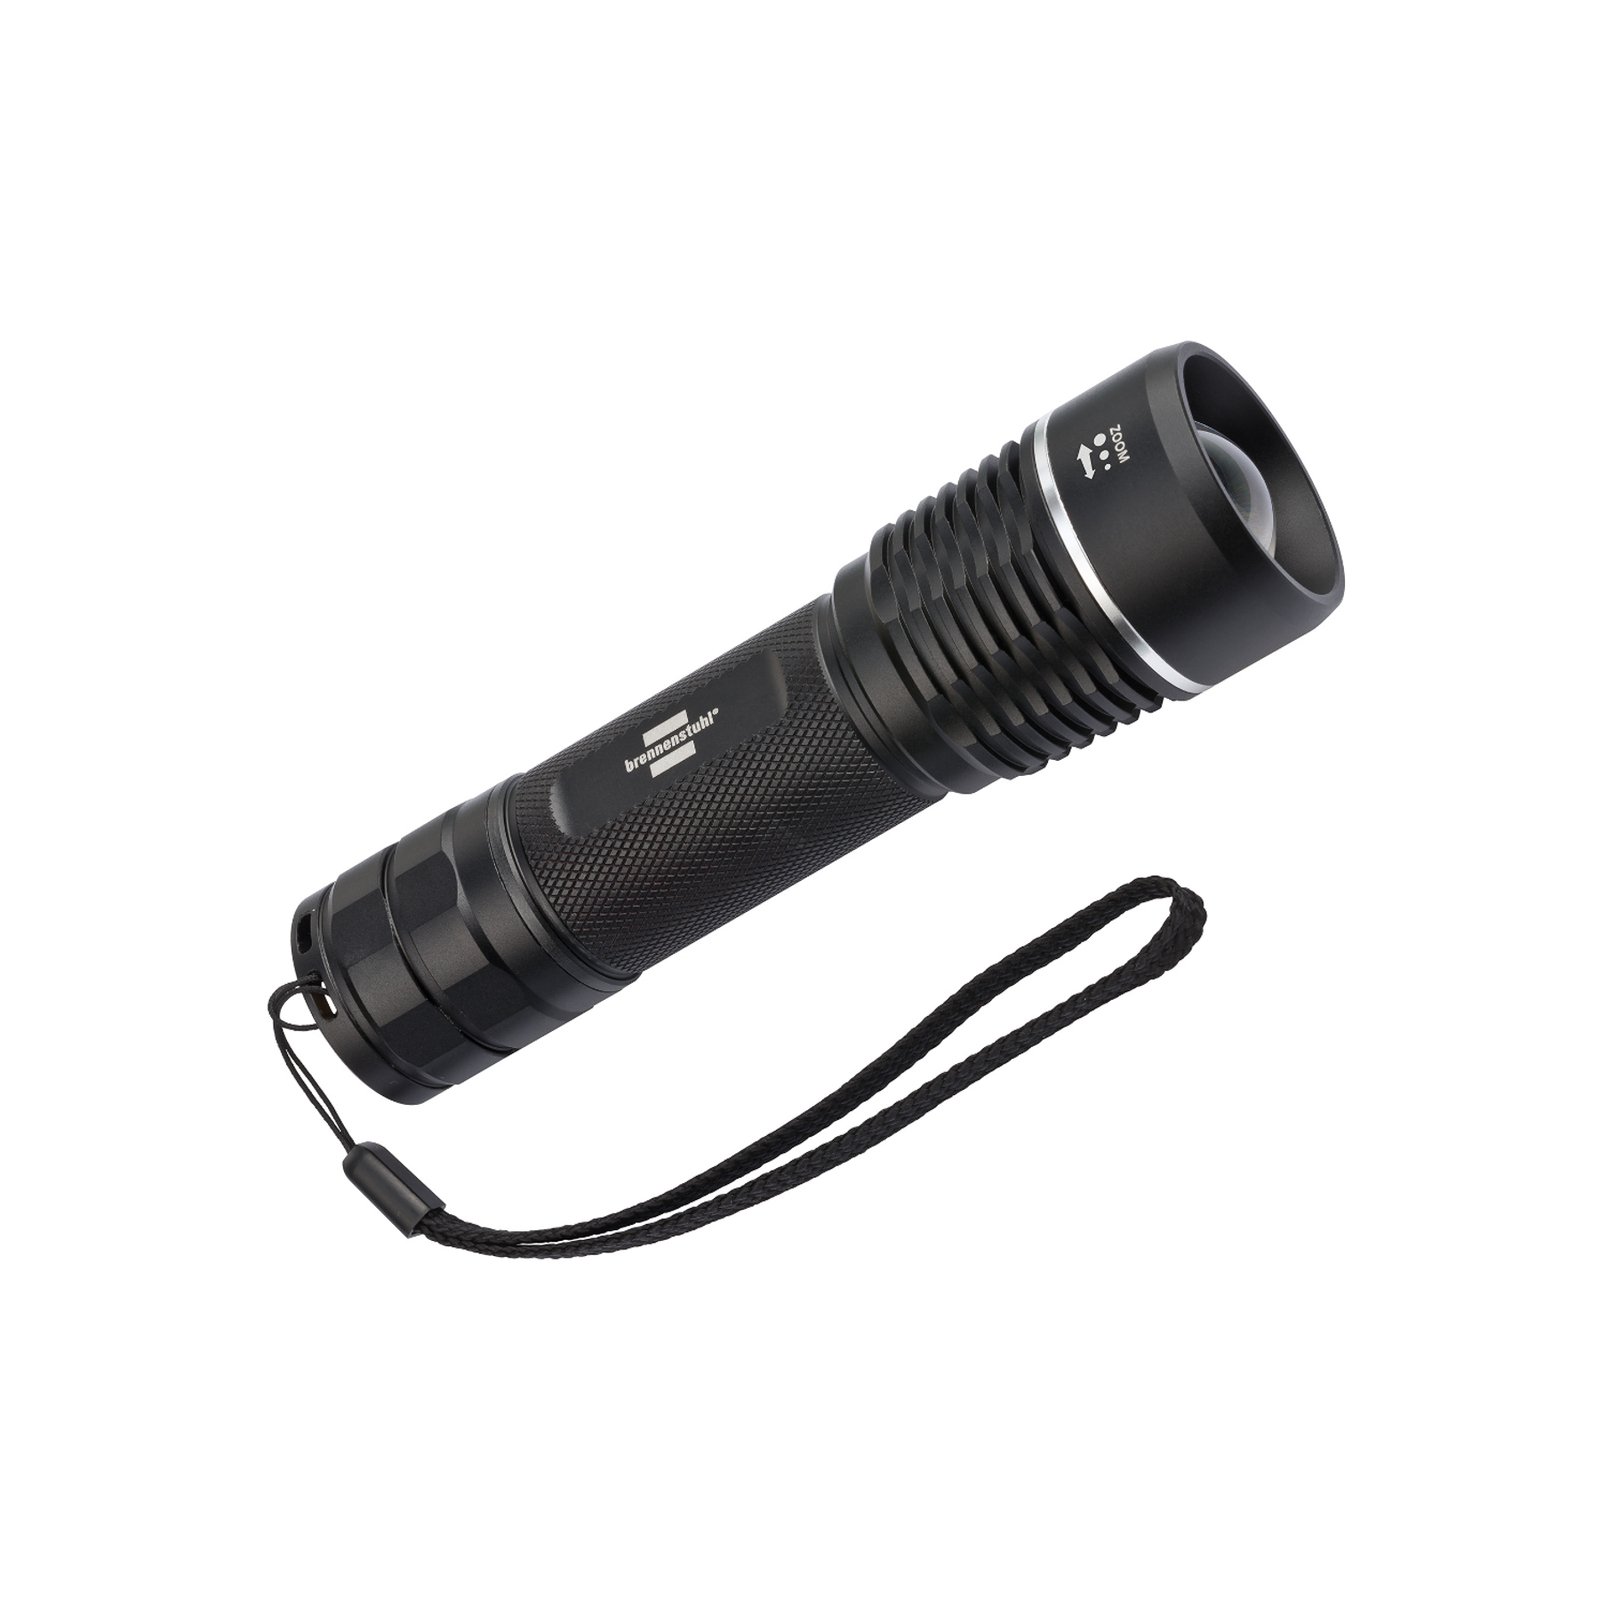 LuxPremium TL AF LED torch 1,250 lm rechargeable battery